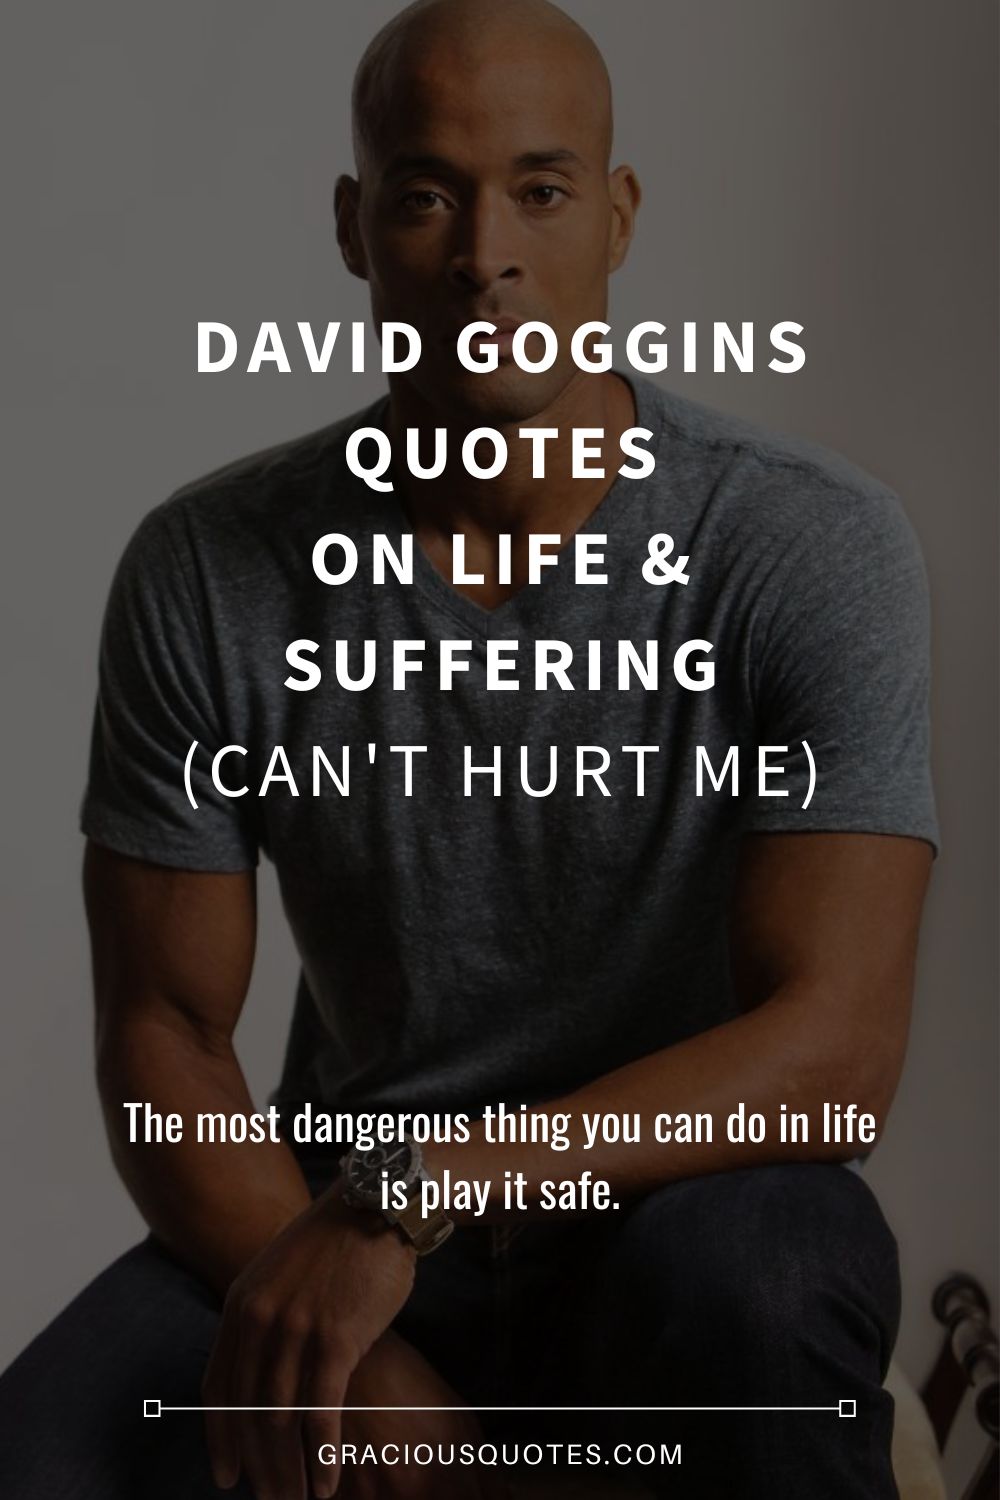 80 David Goggins Quotes on Life & Suffering (CAN'T HURT ME)